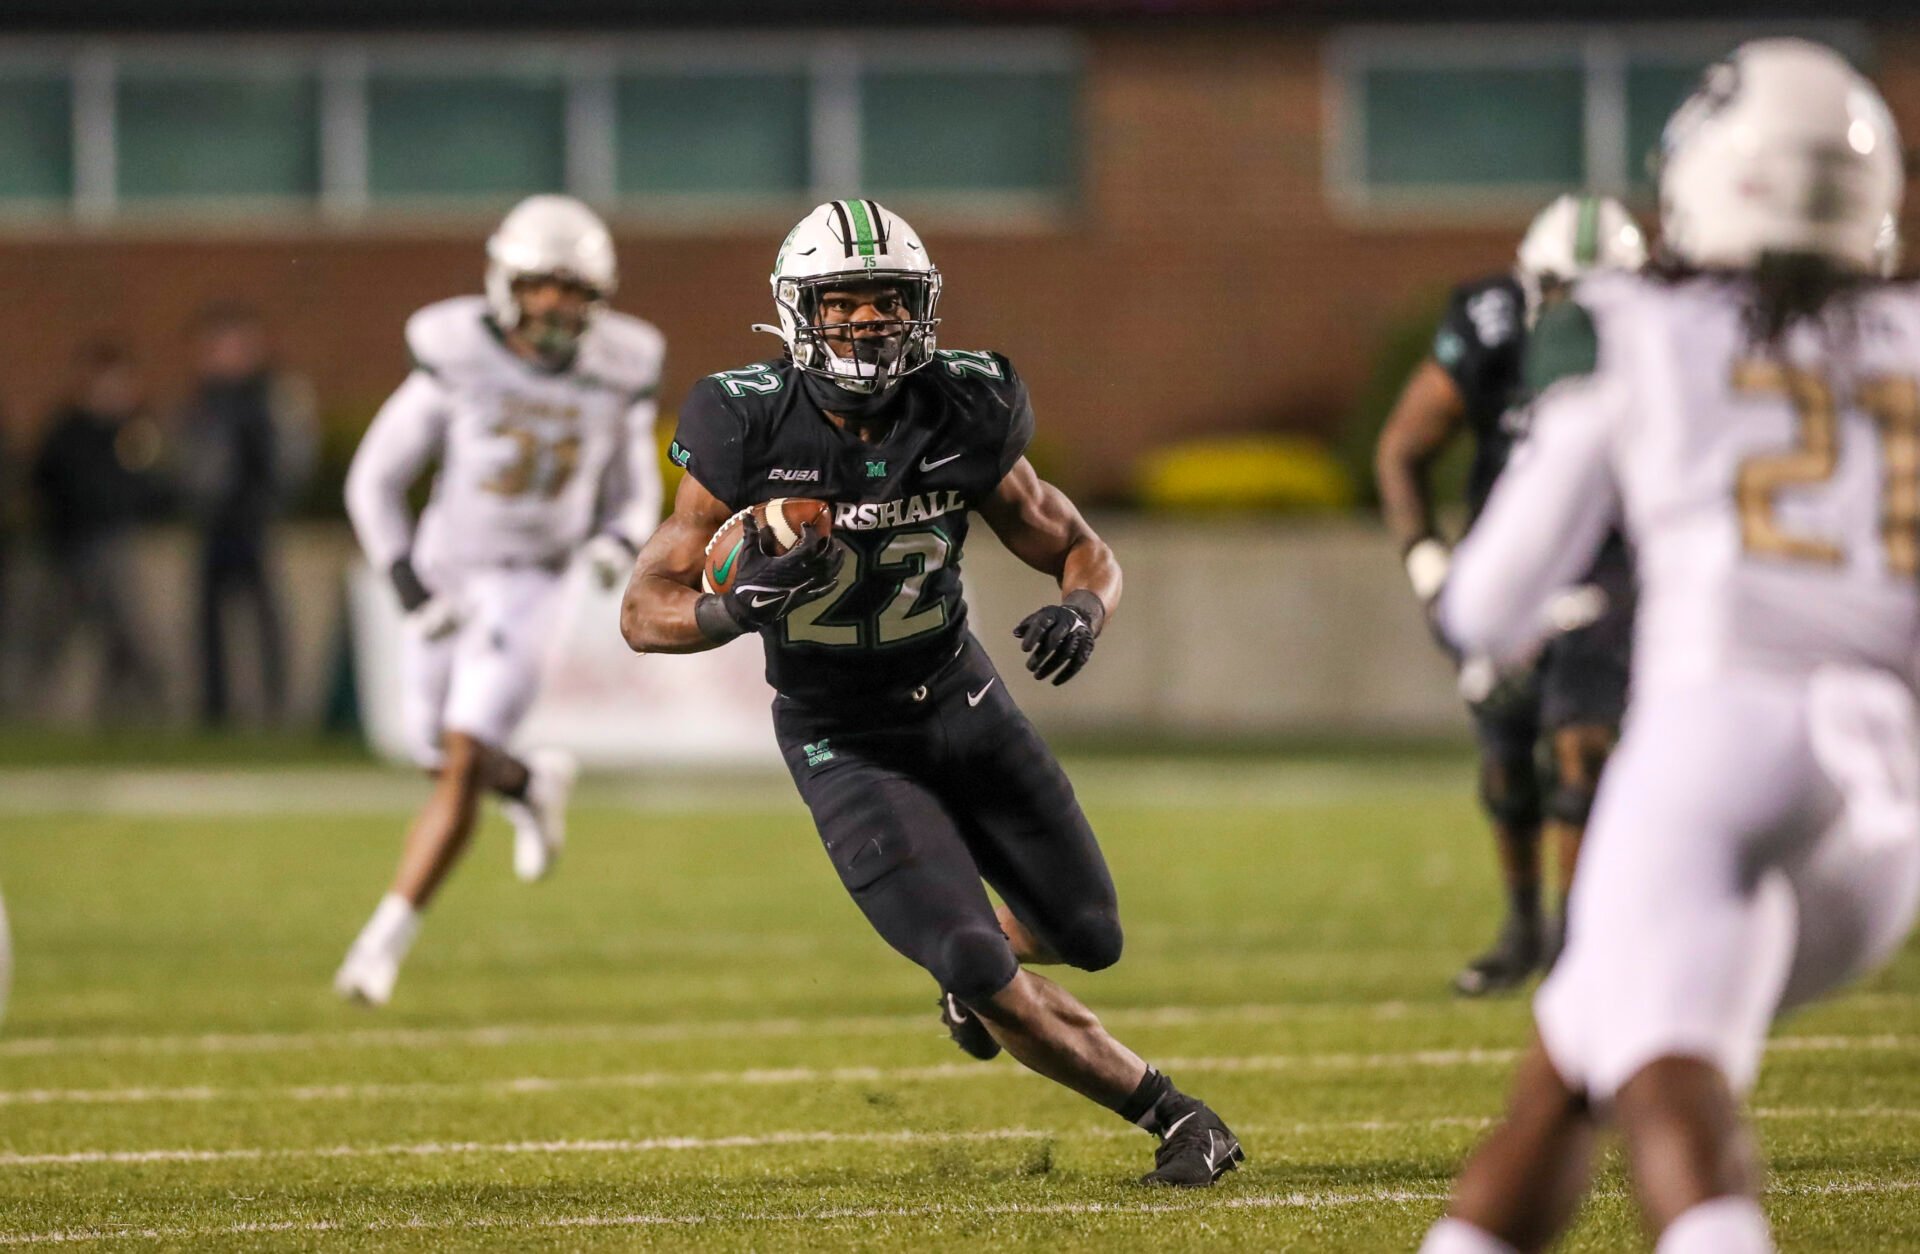 Marshall Thundering Herd running back Rasheen Ali (22) runs the ball after a catch against the UAB Blazers during the third quarter at Joan C. Edwards Stadium.